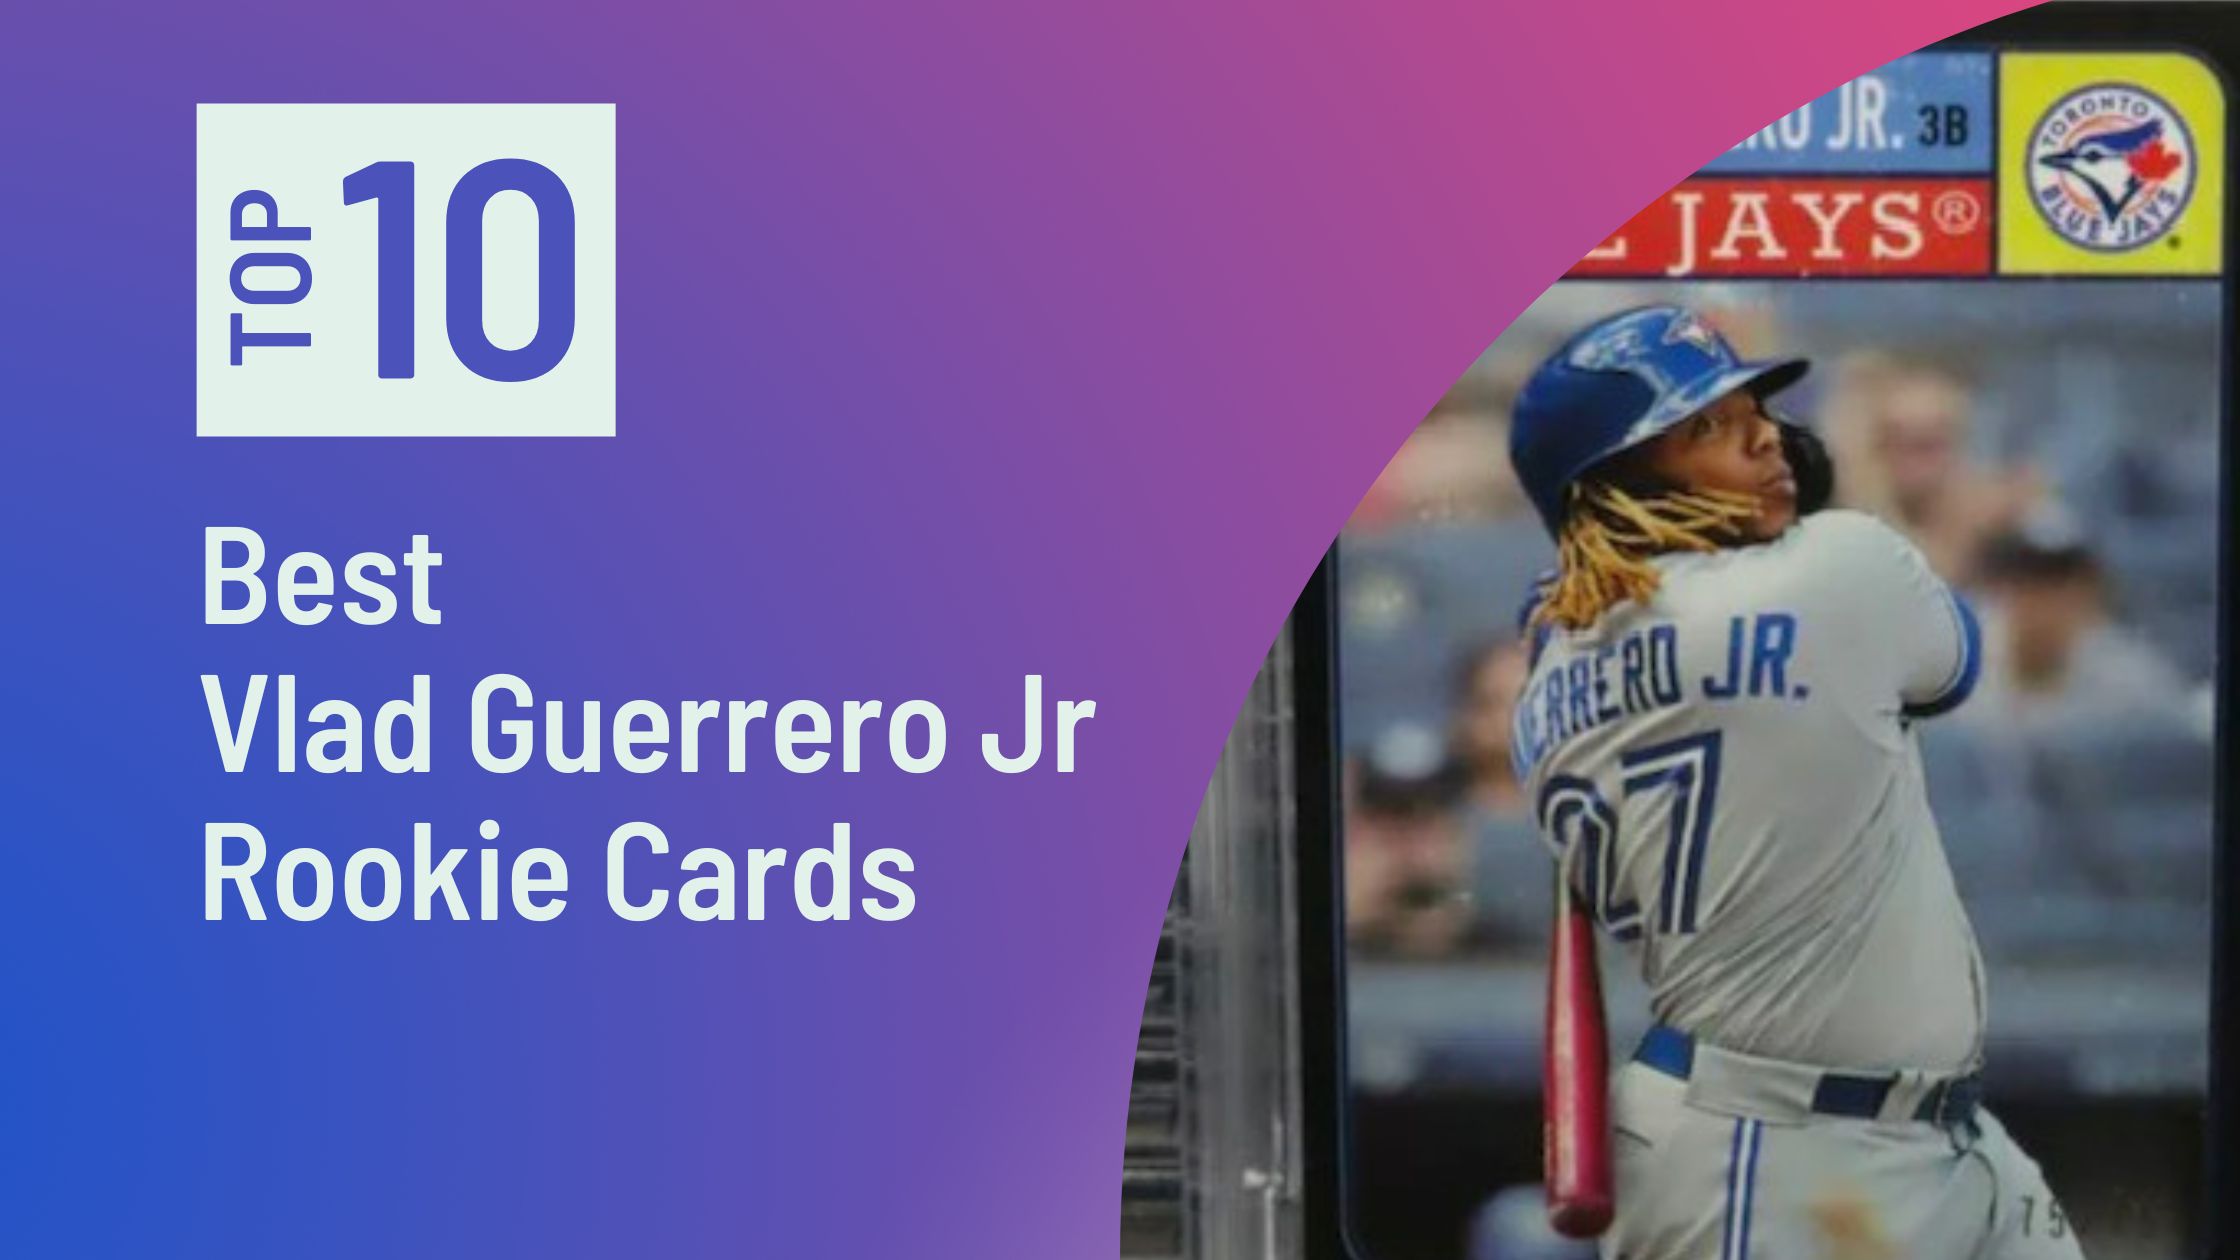 Featured image for the Best Vladimir Guerrero Jr Rookie Cards blog post on Sports Card Sharks